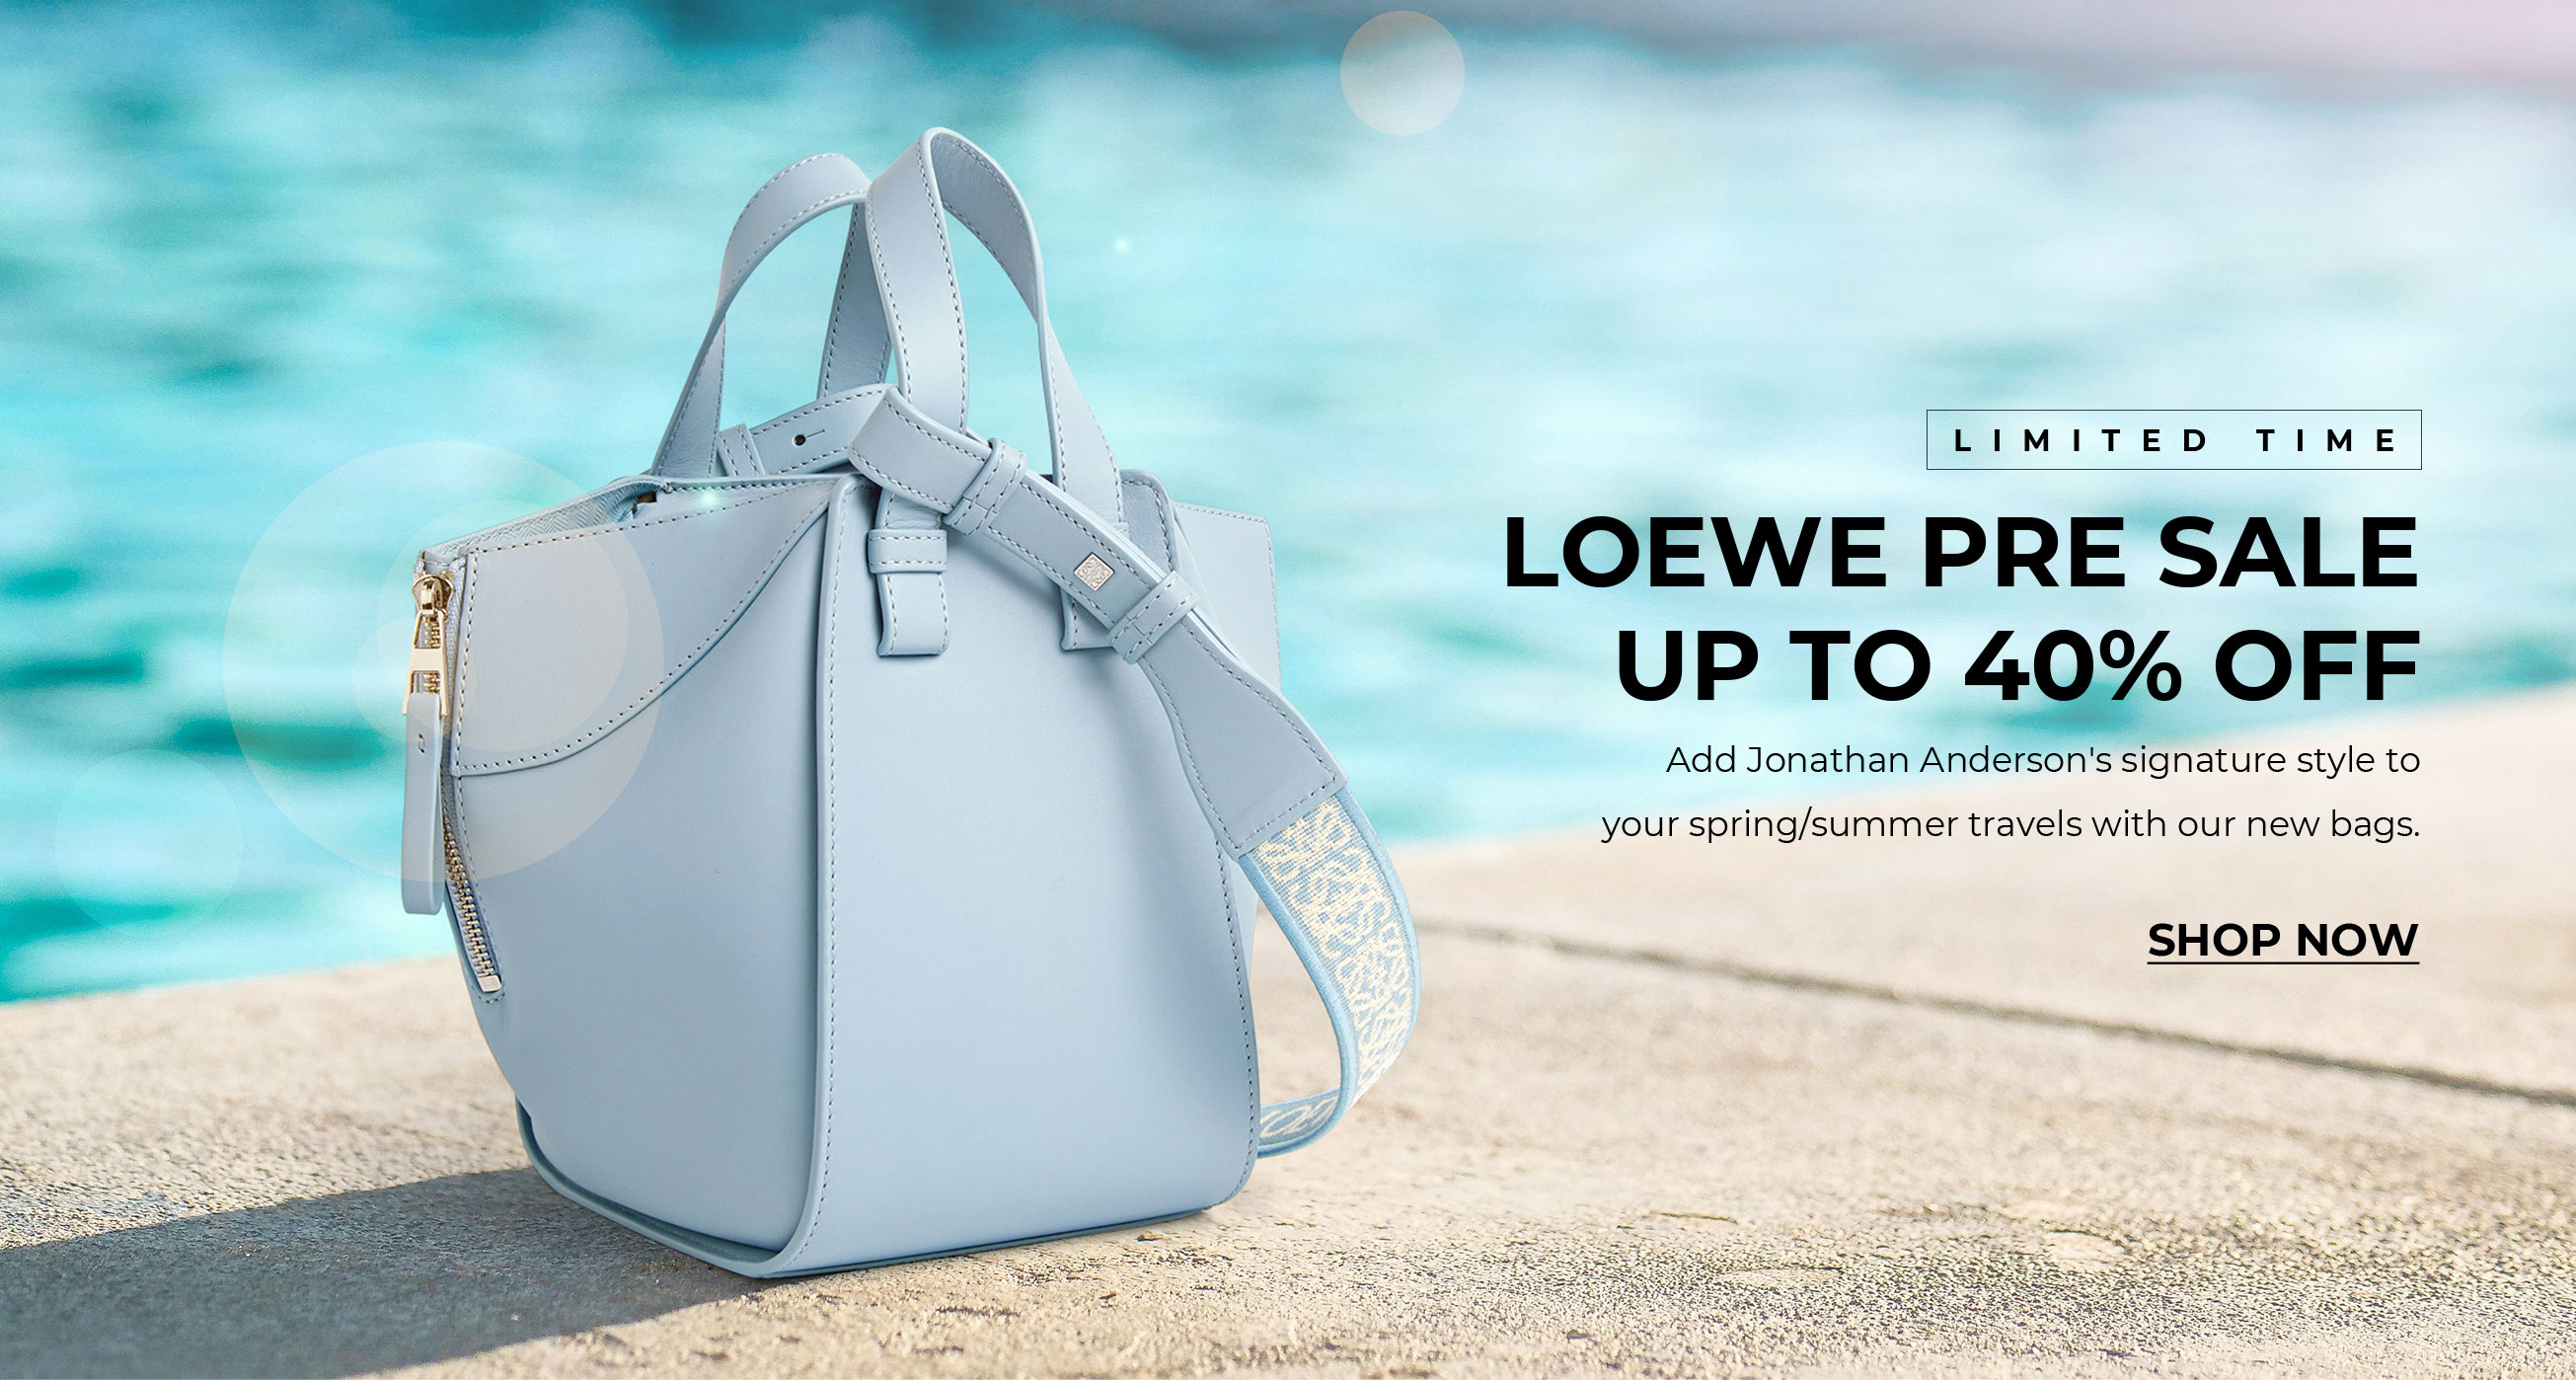 Loewe pre sale<br>up to 40% off limited time